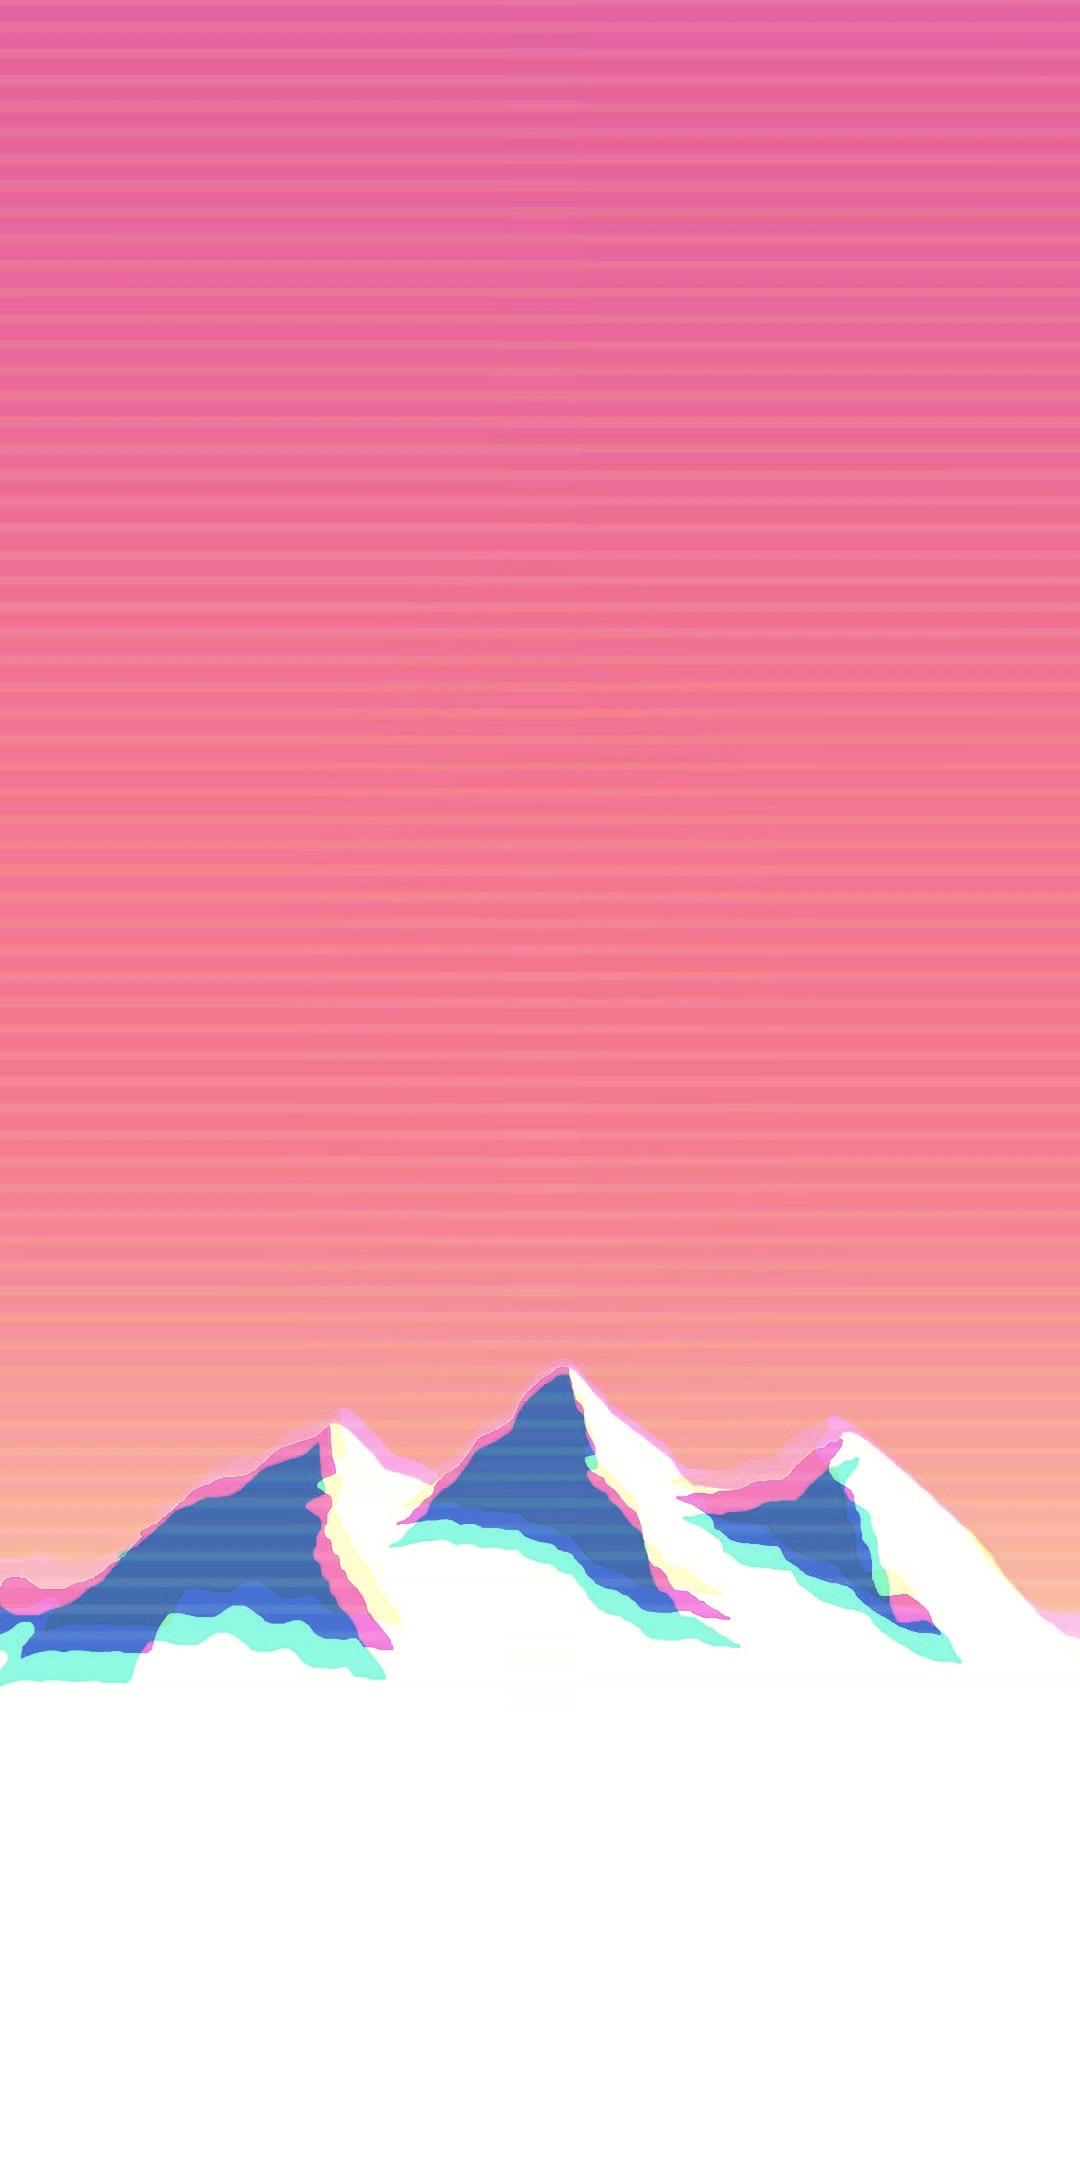 Phone wallpaper I made of classic vaporwave mountains